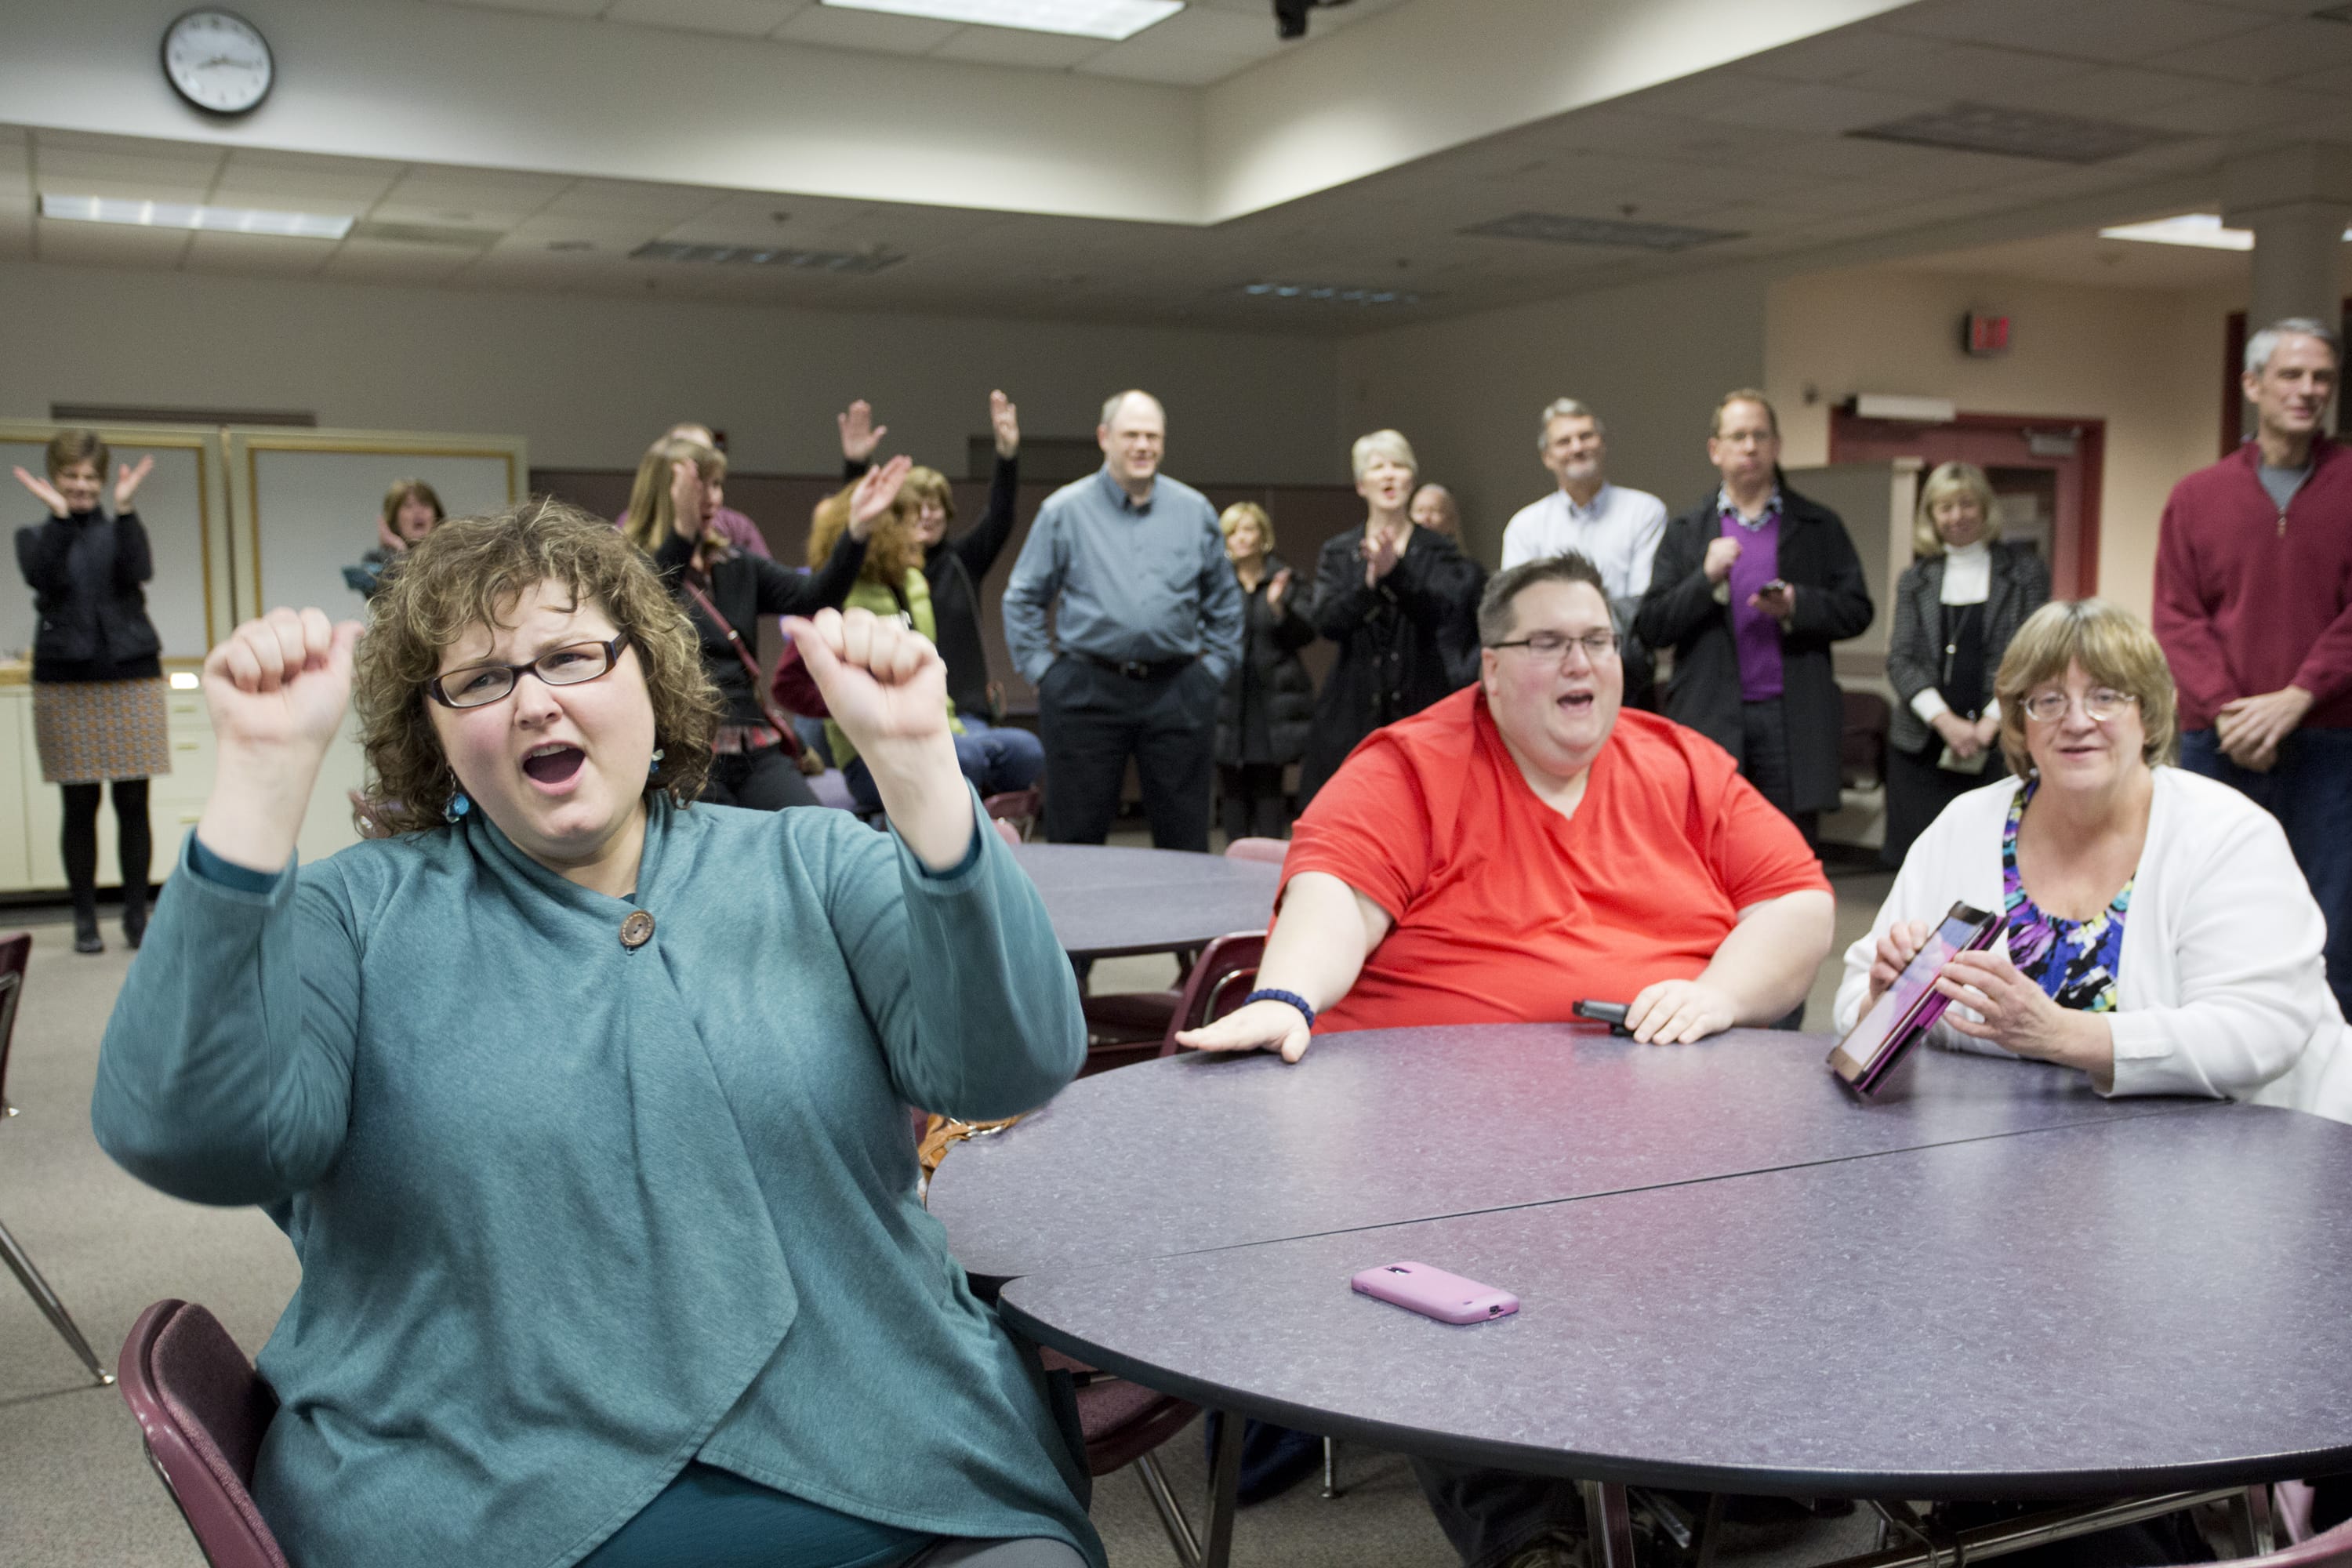 Leslie Morrison, left, a Vancouver Public Schools special education teacher with the GATE Program, reacts to election results, along with other teachers and board members, Tuesday evening.